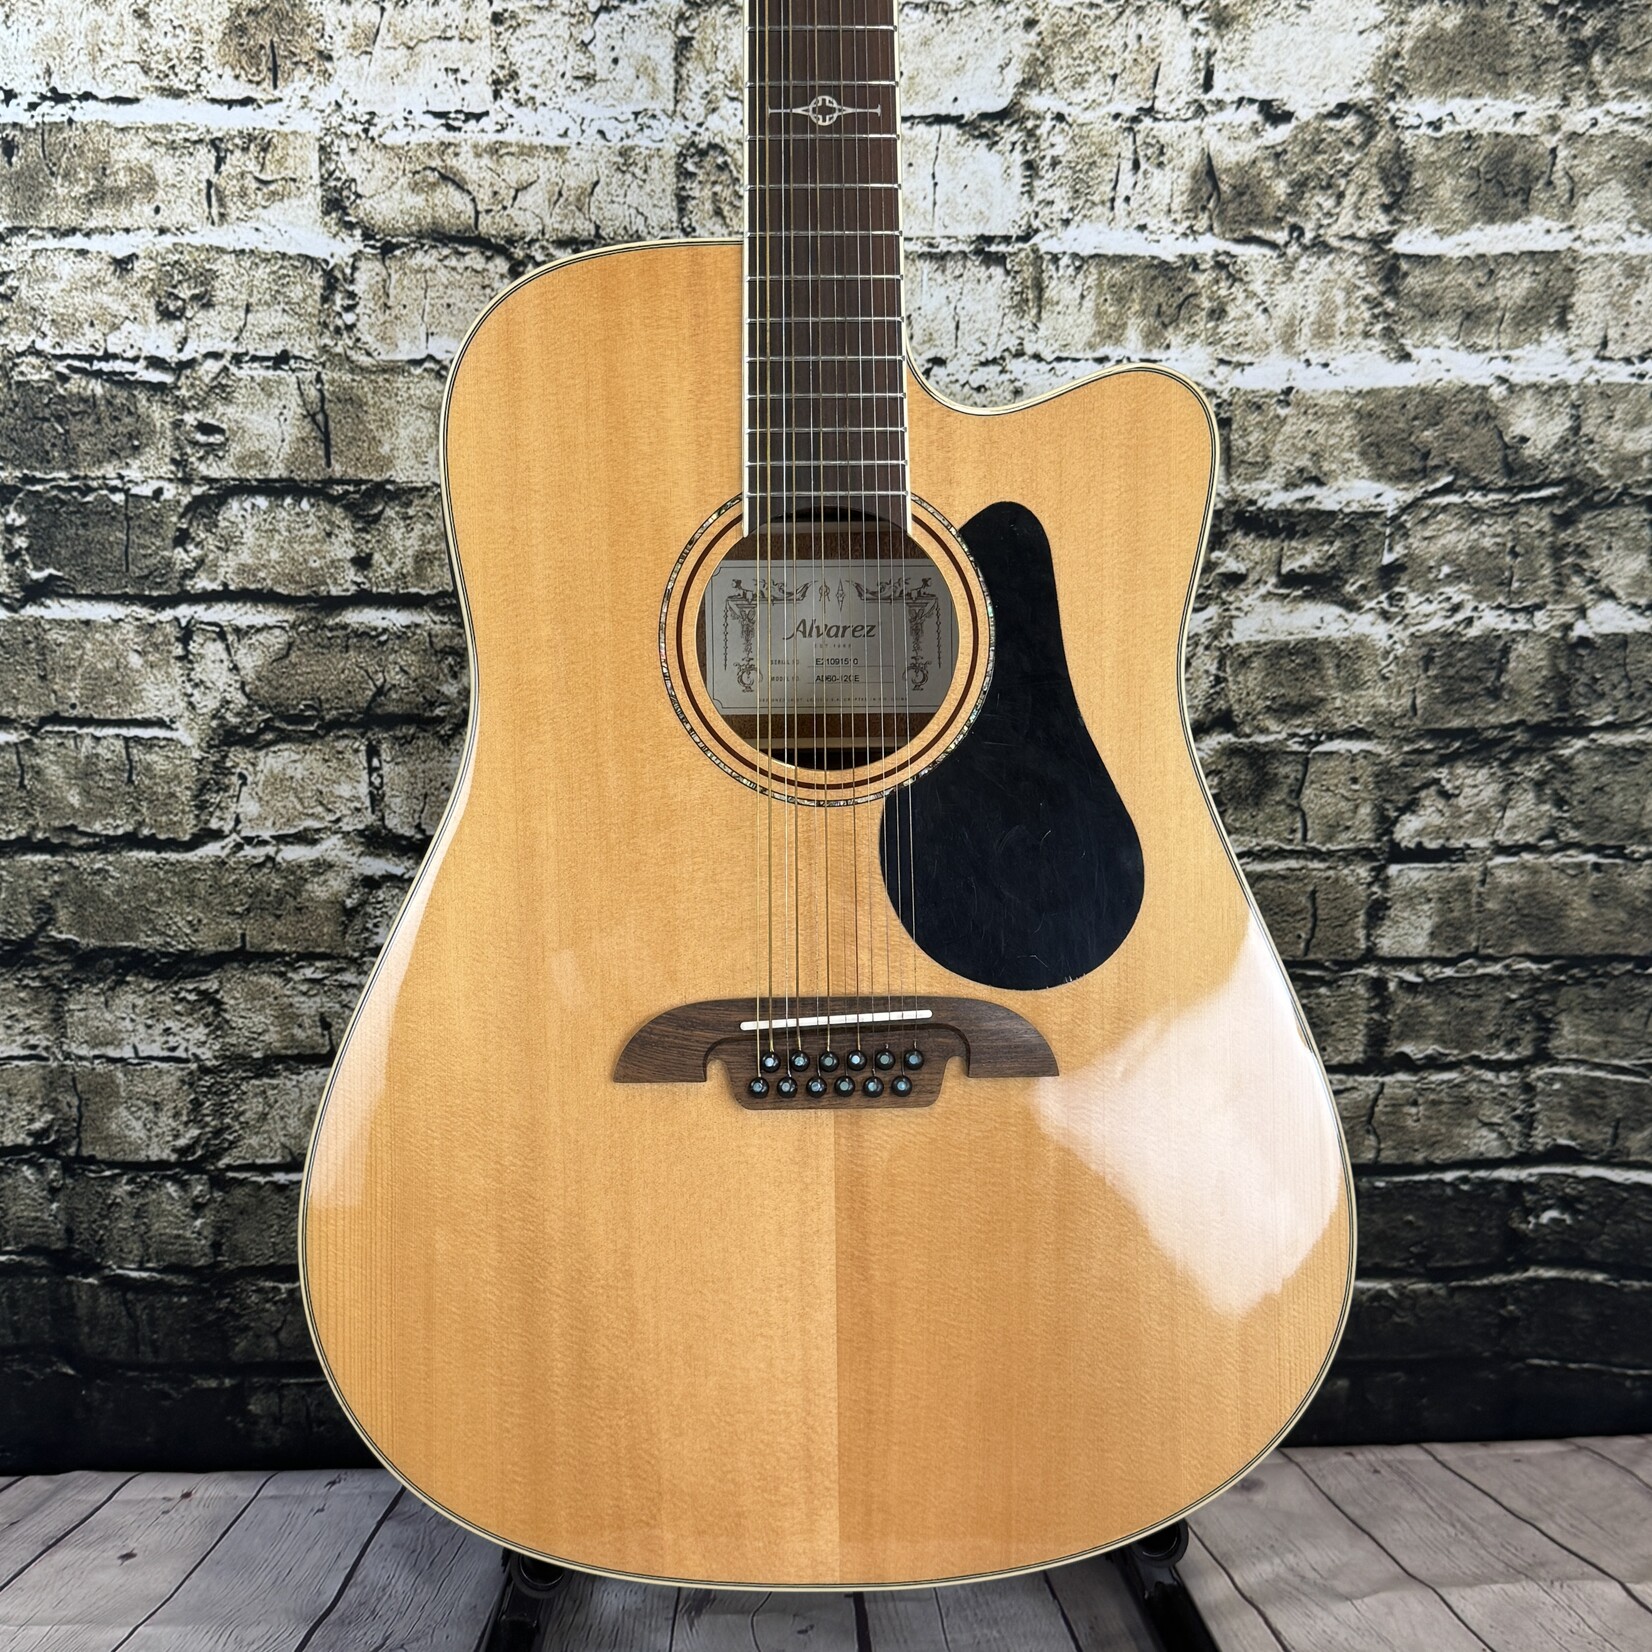 Alvarez AD60-12CE Artist Dreadnought 12-String Acoustic-Electric Guitar - Natural (Used)